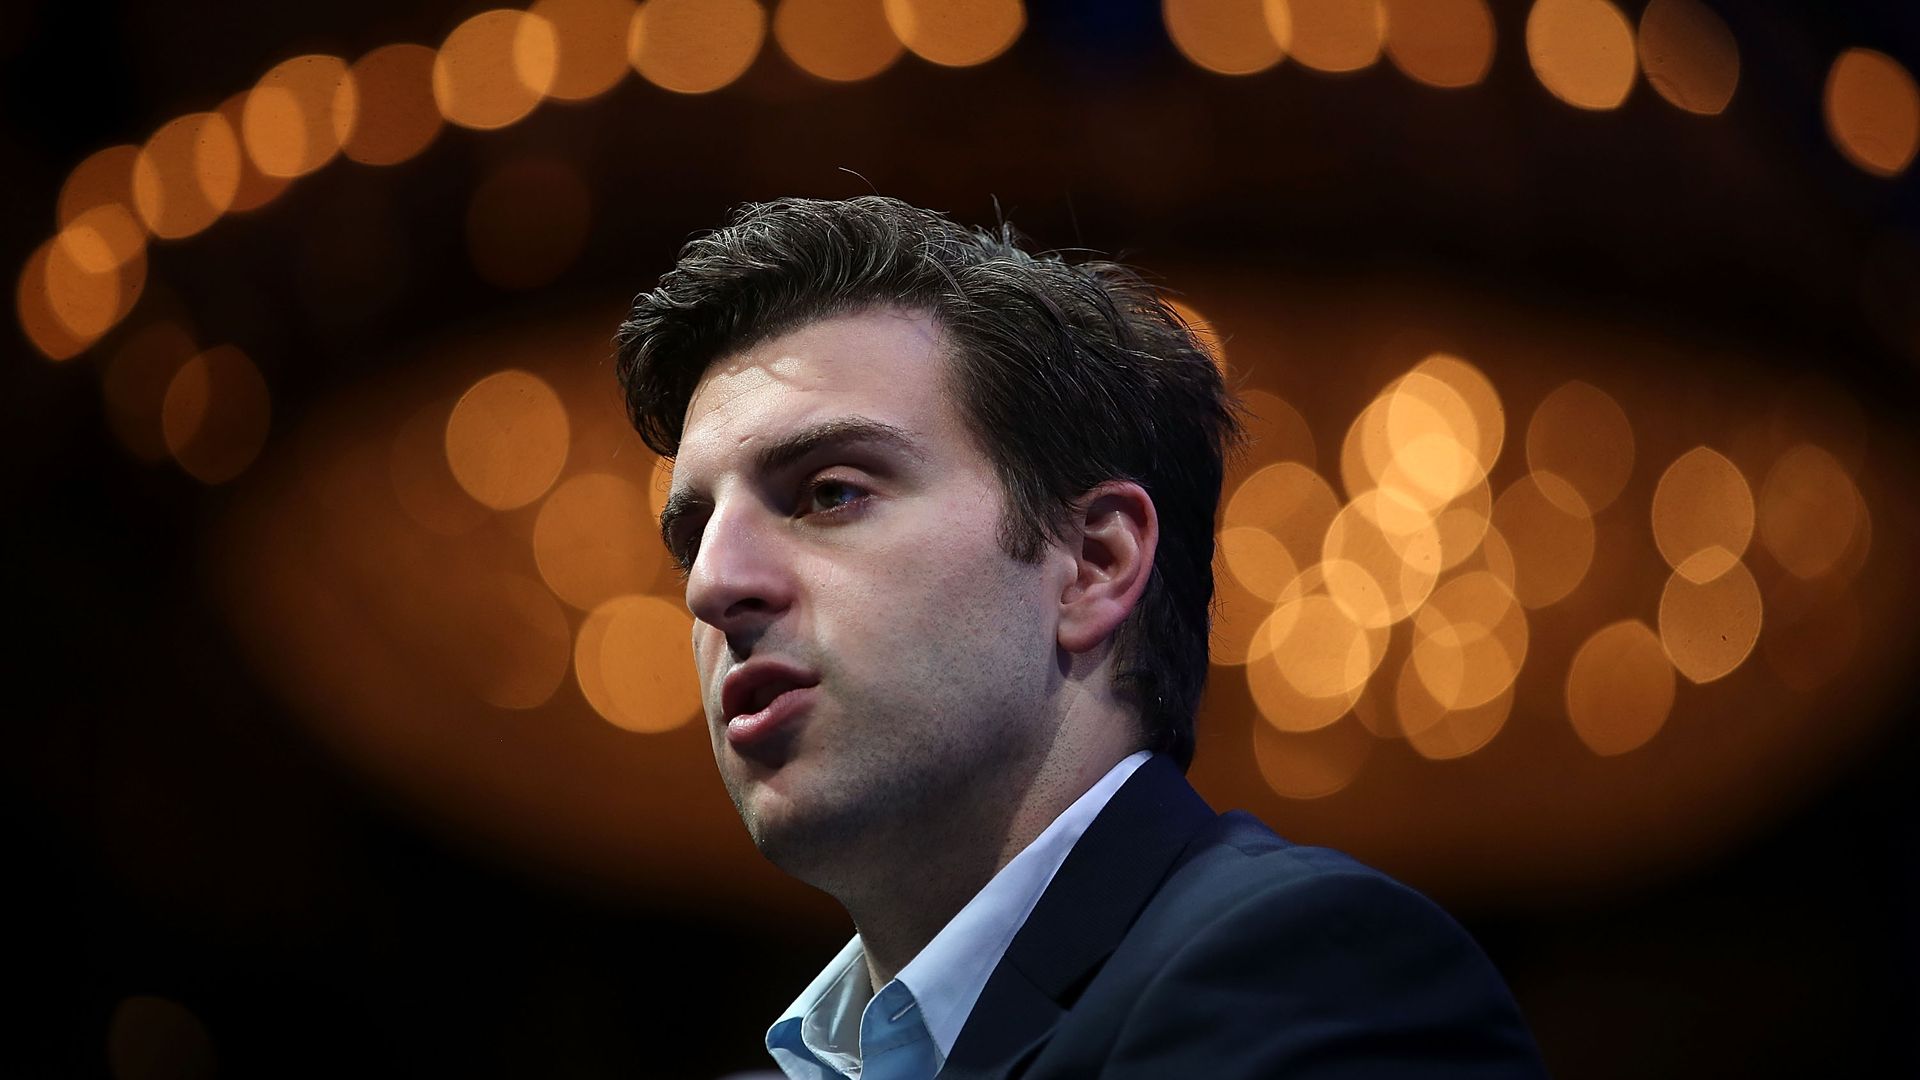 Airbnb co-founder and CEO Brian Chesky speaking in San Francisco, California, in 2015.